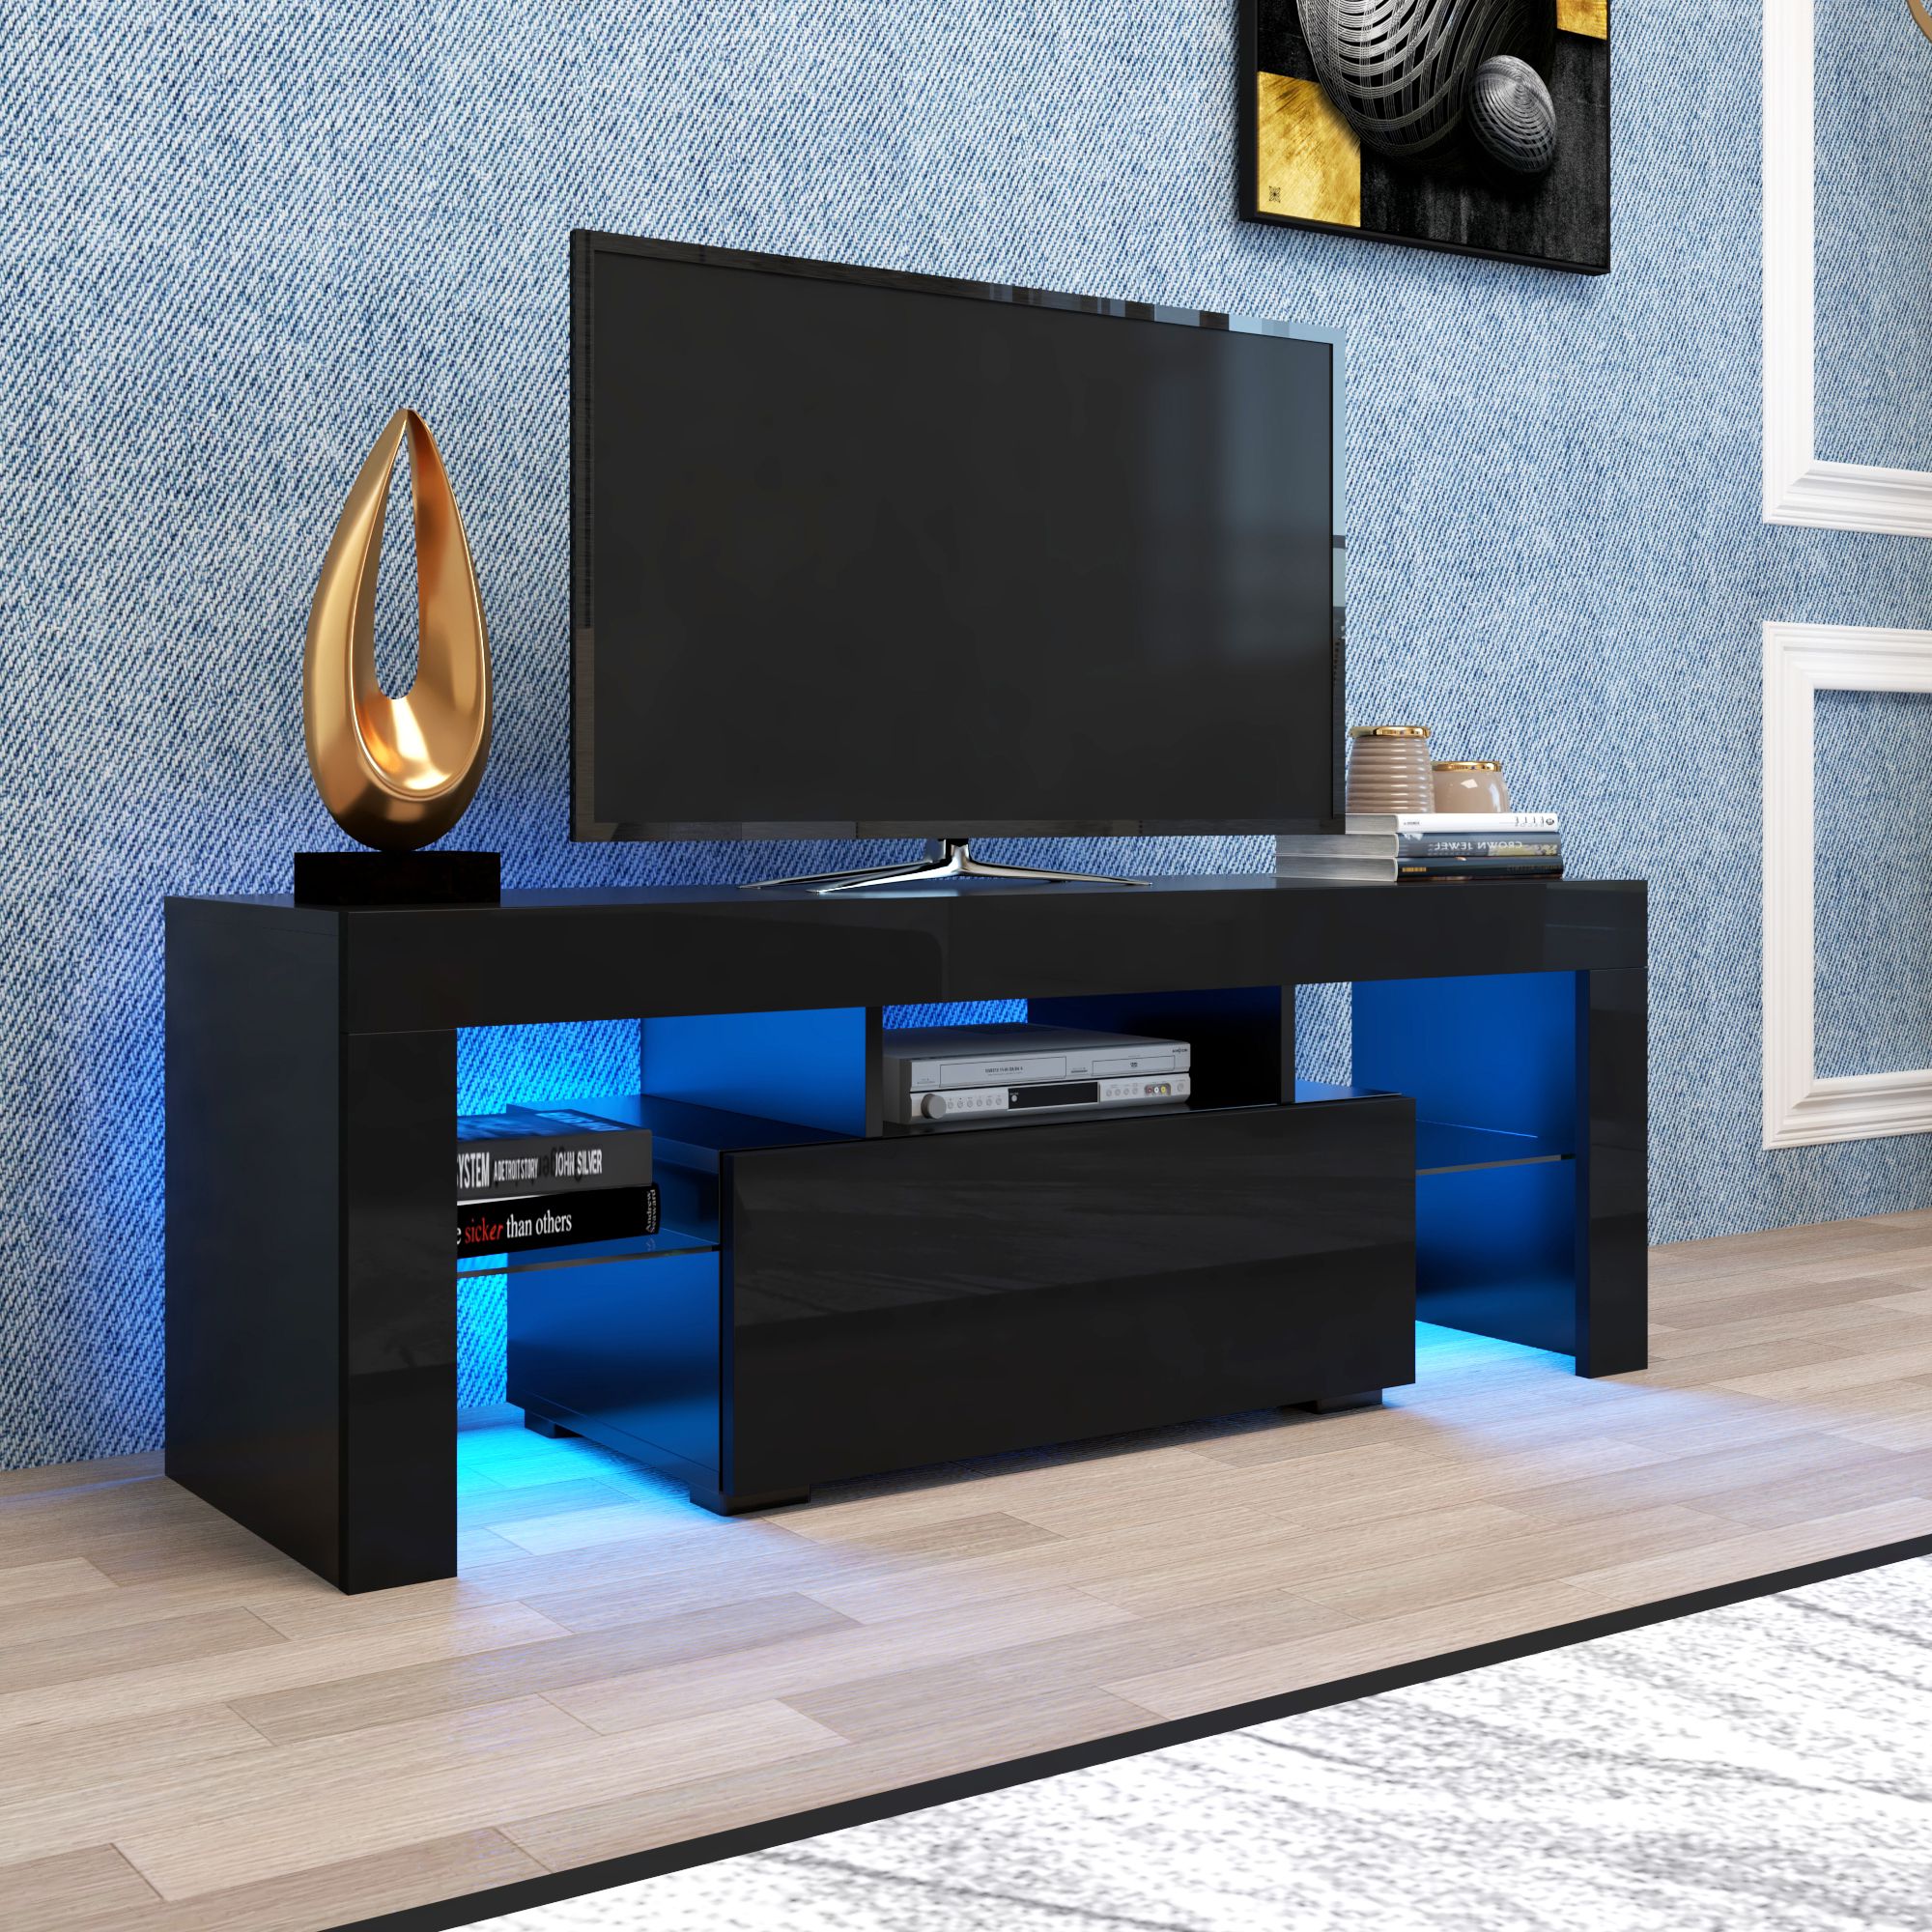 Widely Used Glass Shelves Tv Stands For Tvs Up To 65" Throughout Black Tv Stand For Up To 65 Inch Tv, Yofe High Gloss Tv (View 3 of 10)